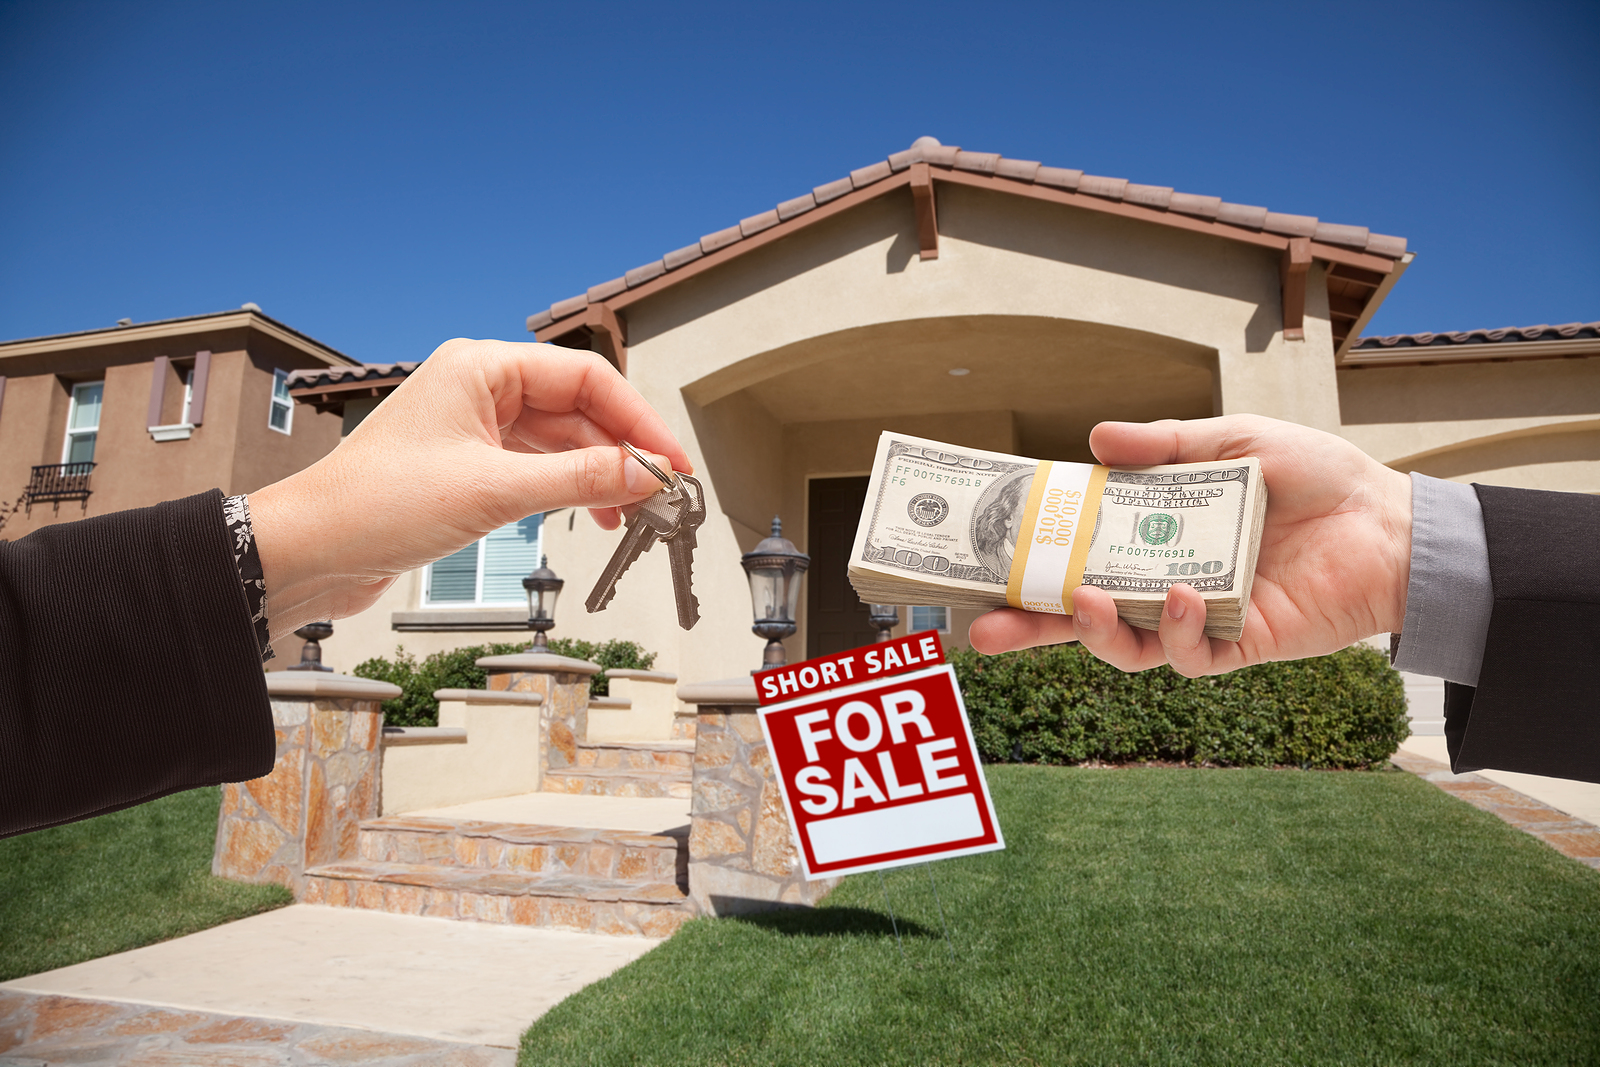 Sell My House Fast for Cash: 5 Great Reasons to Make the Sale